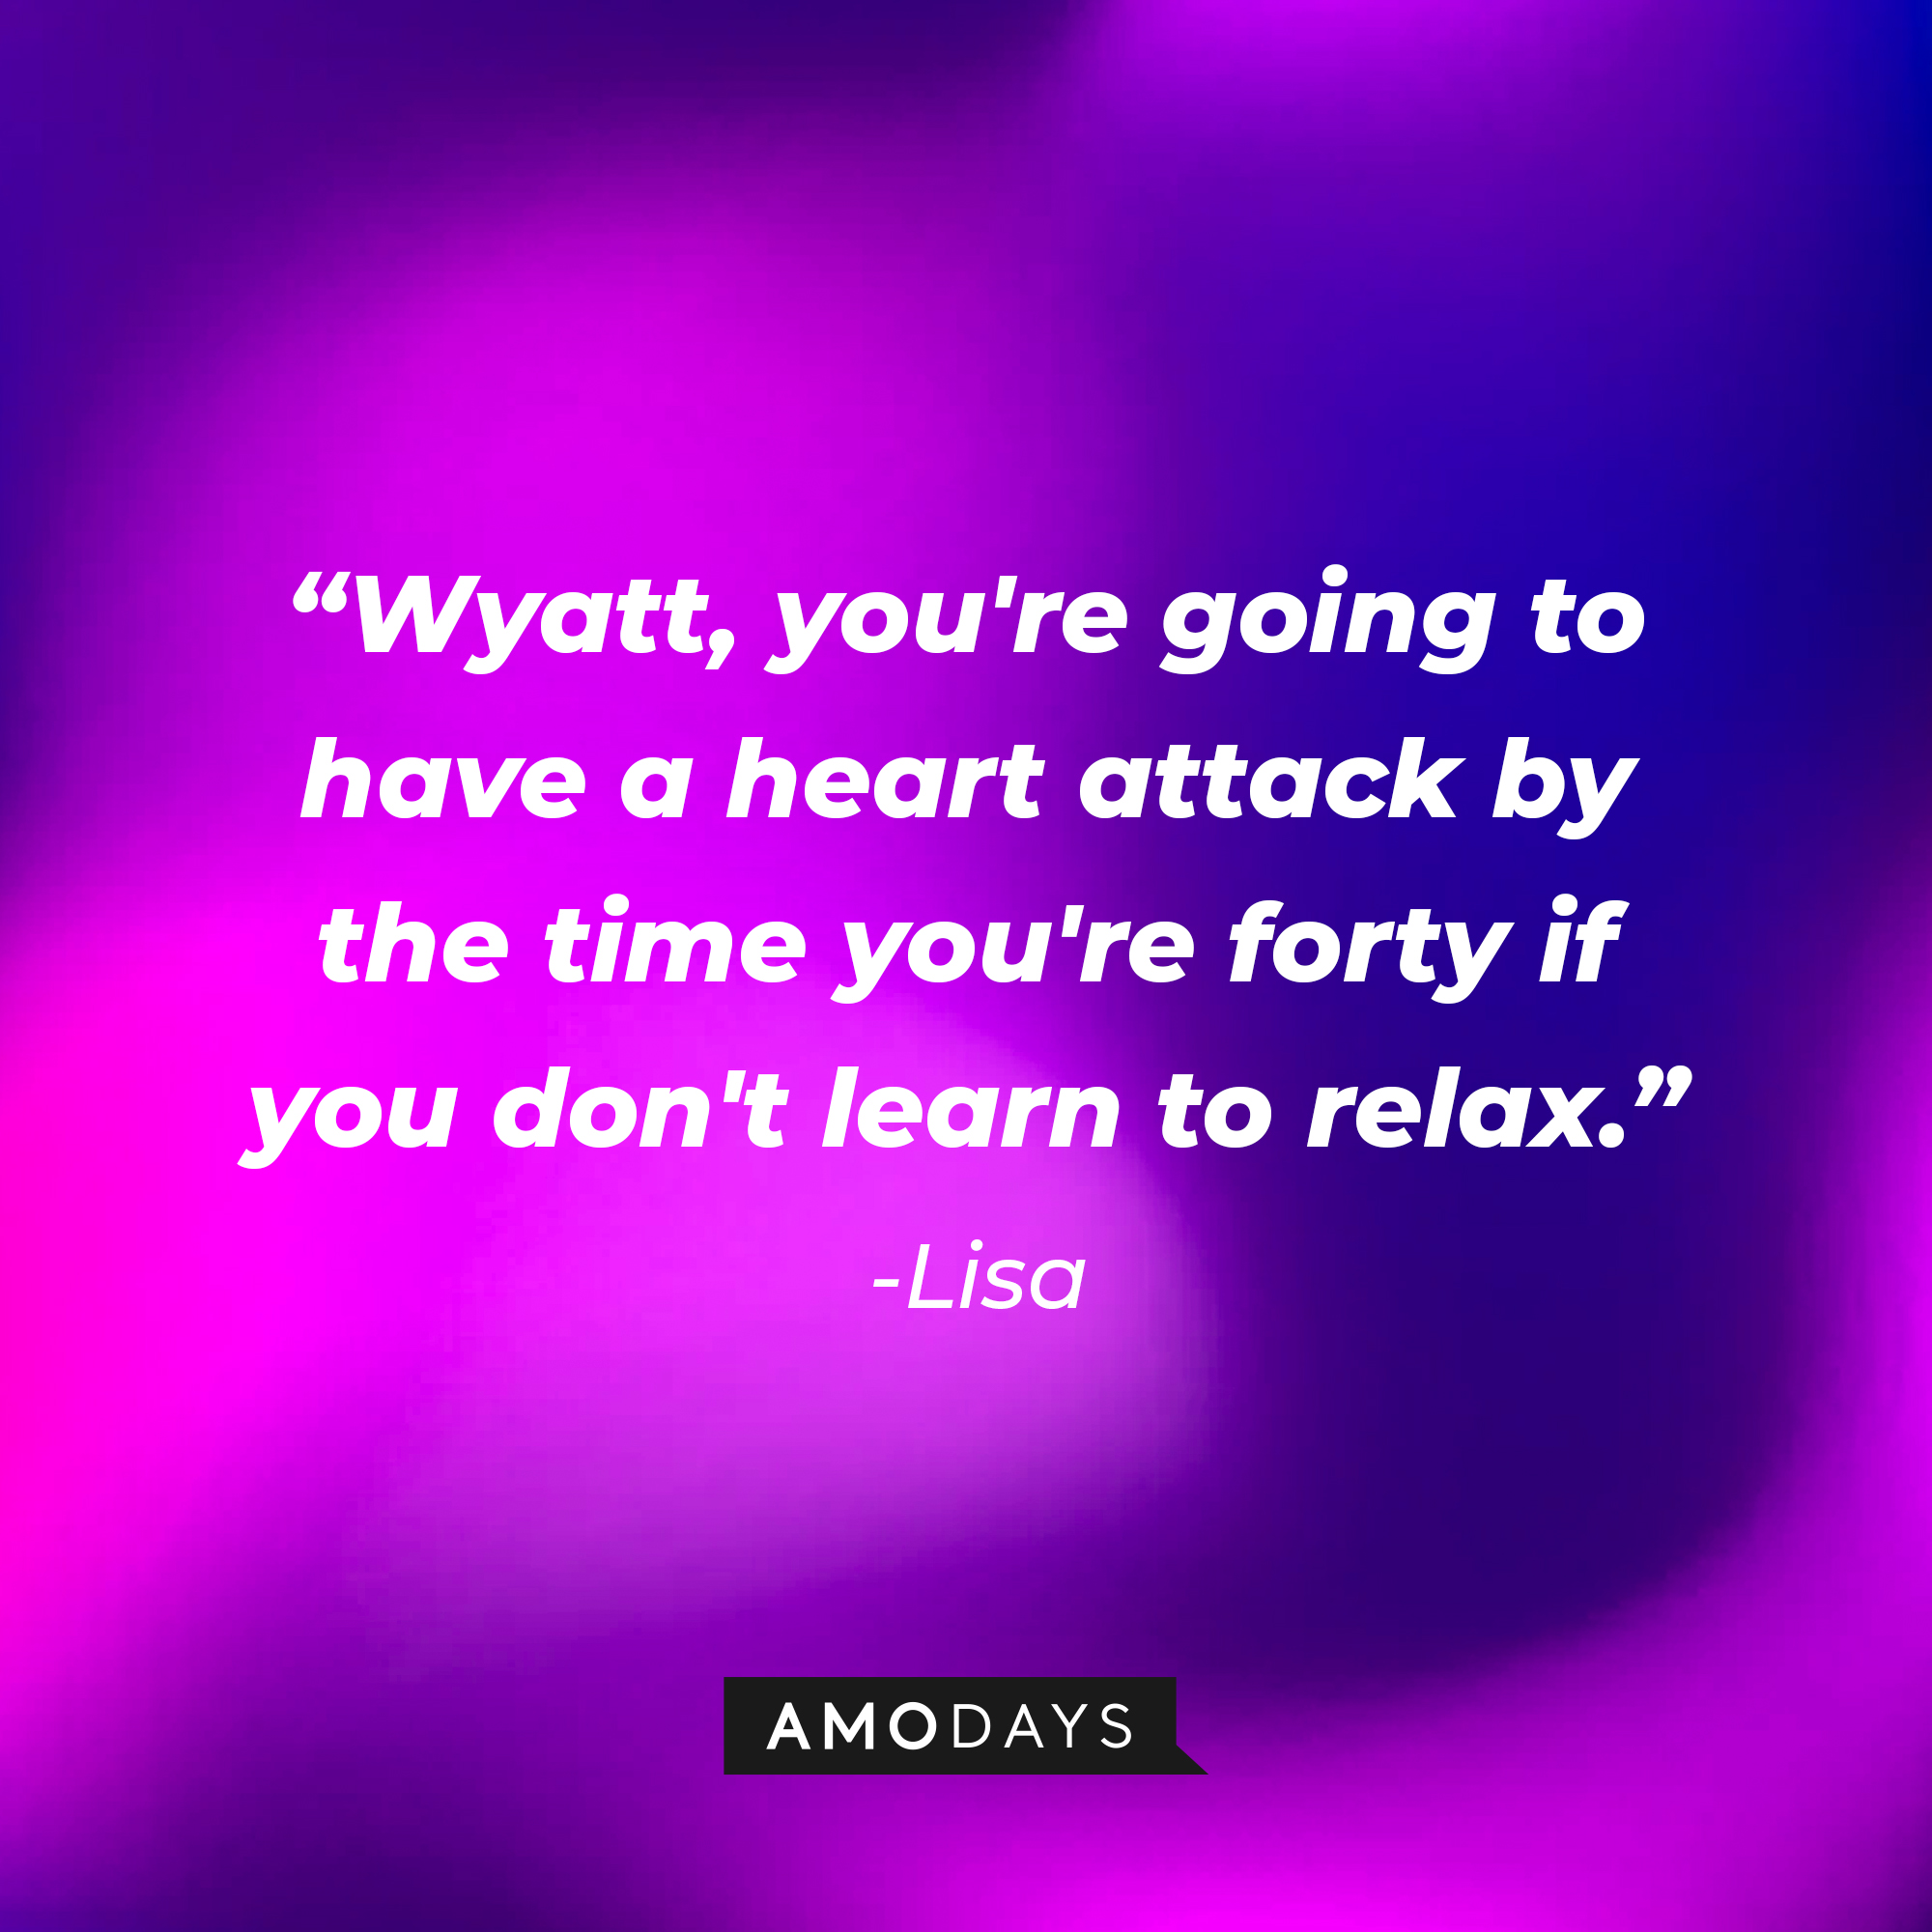 Lisa’s quote:  "Wyatt, you're going to have a heart attack by the time you're forty if you don't learn to relax.” | Source: AmoDays